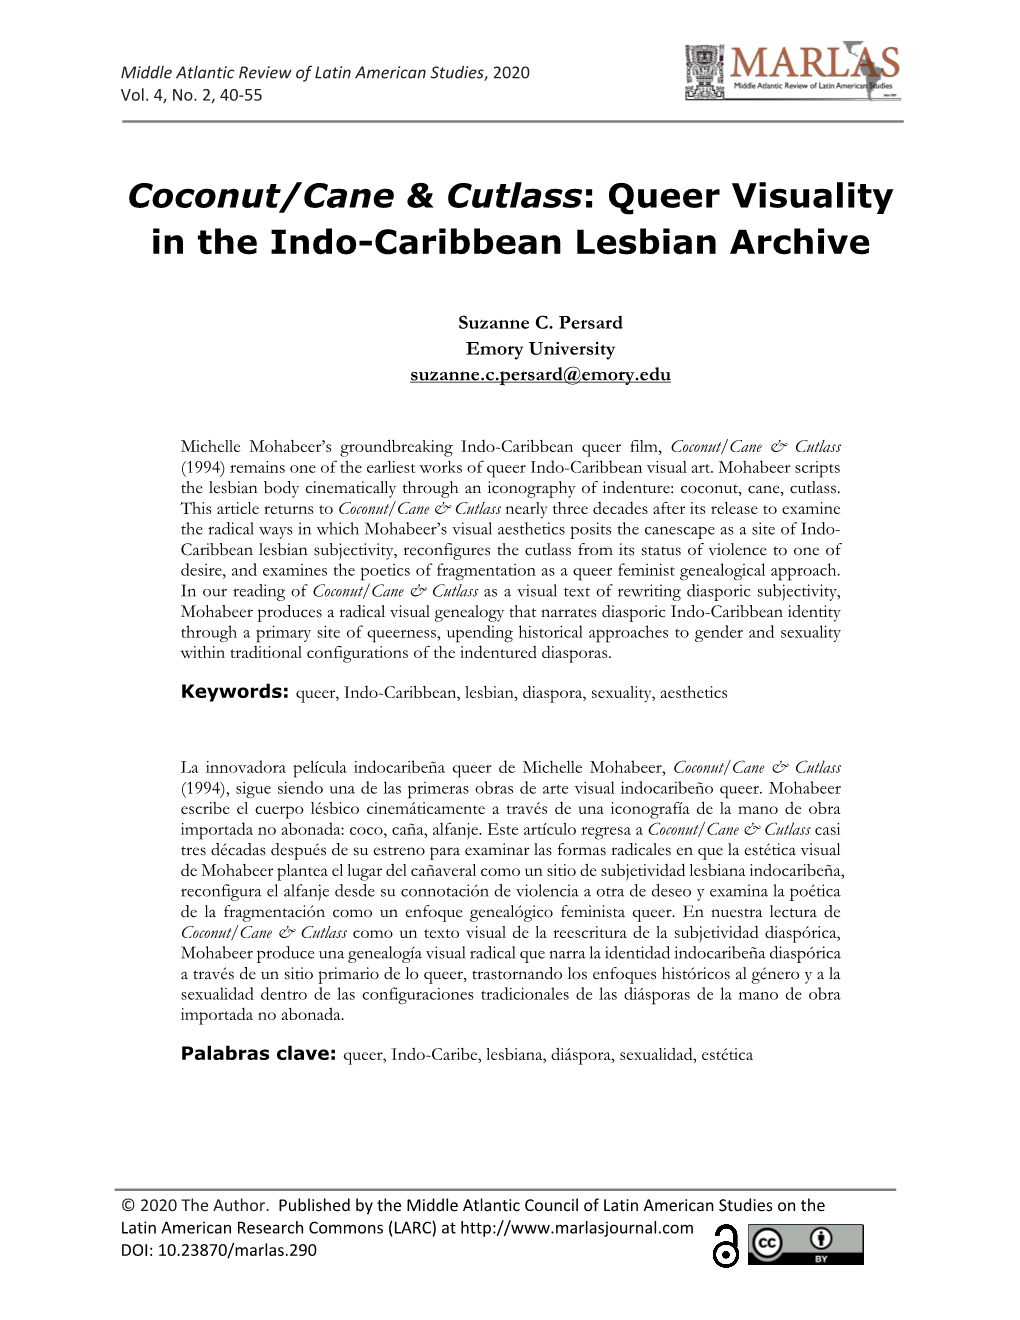 Coconut/Cane & Cutlass: Queer Visuality in the Indo-Caribbean